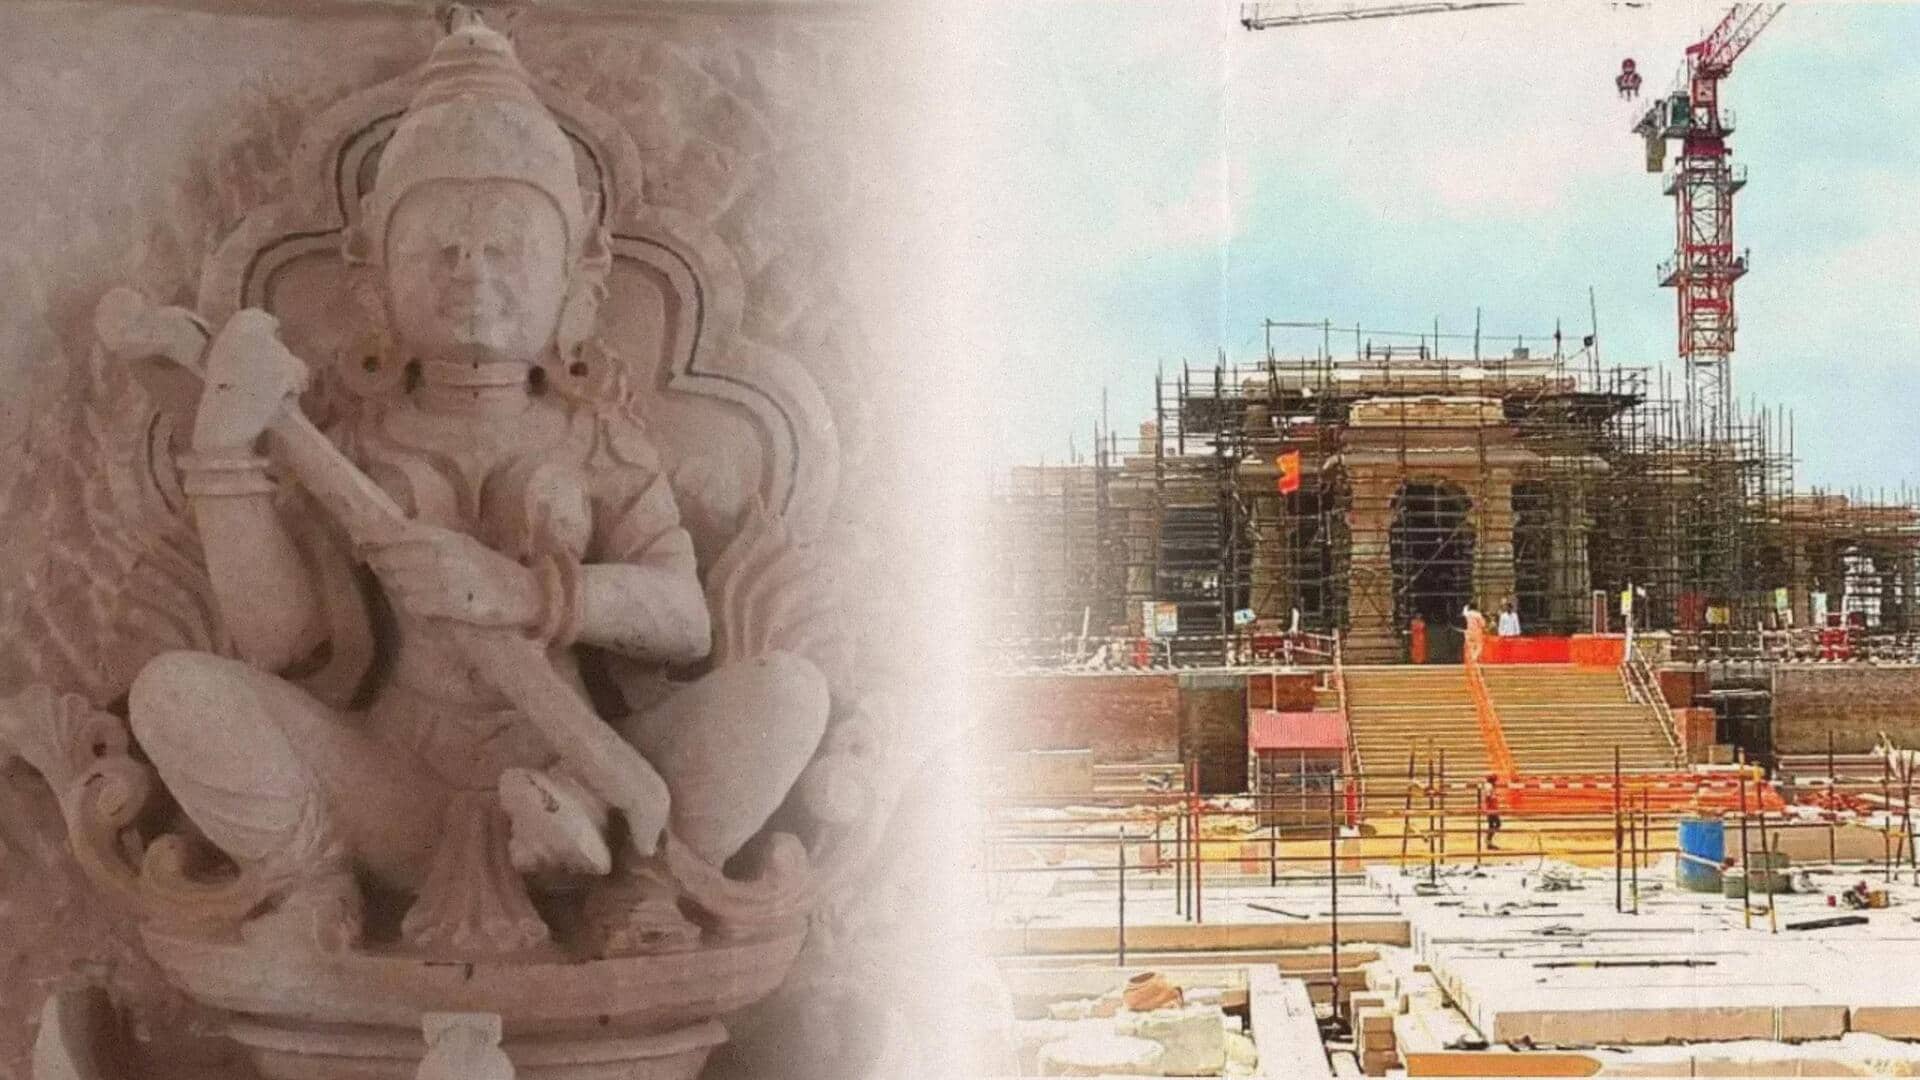 Ram Temple to be consecrated in January after Makar Sankranti